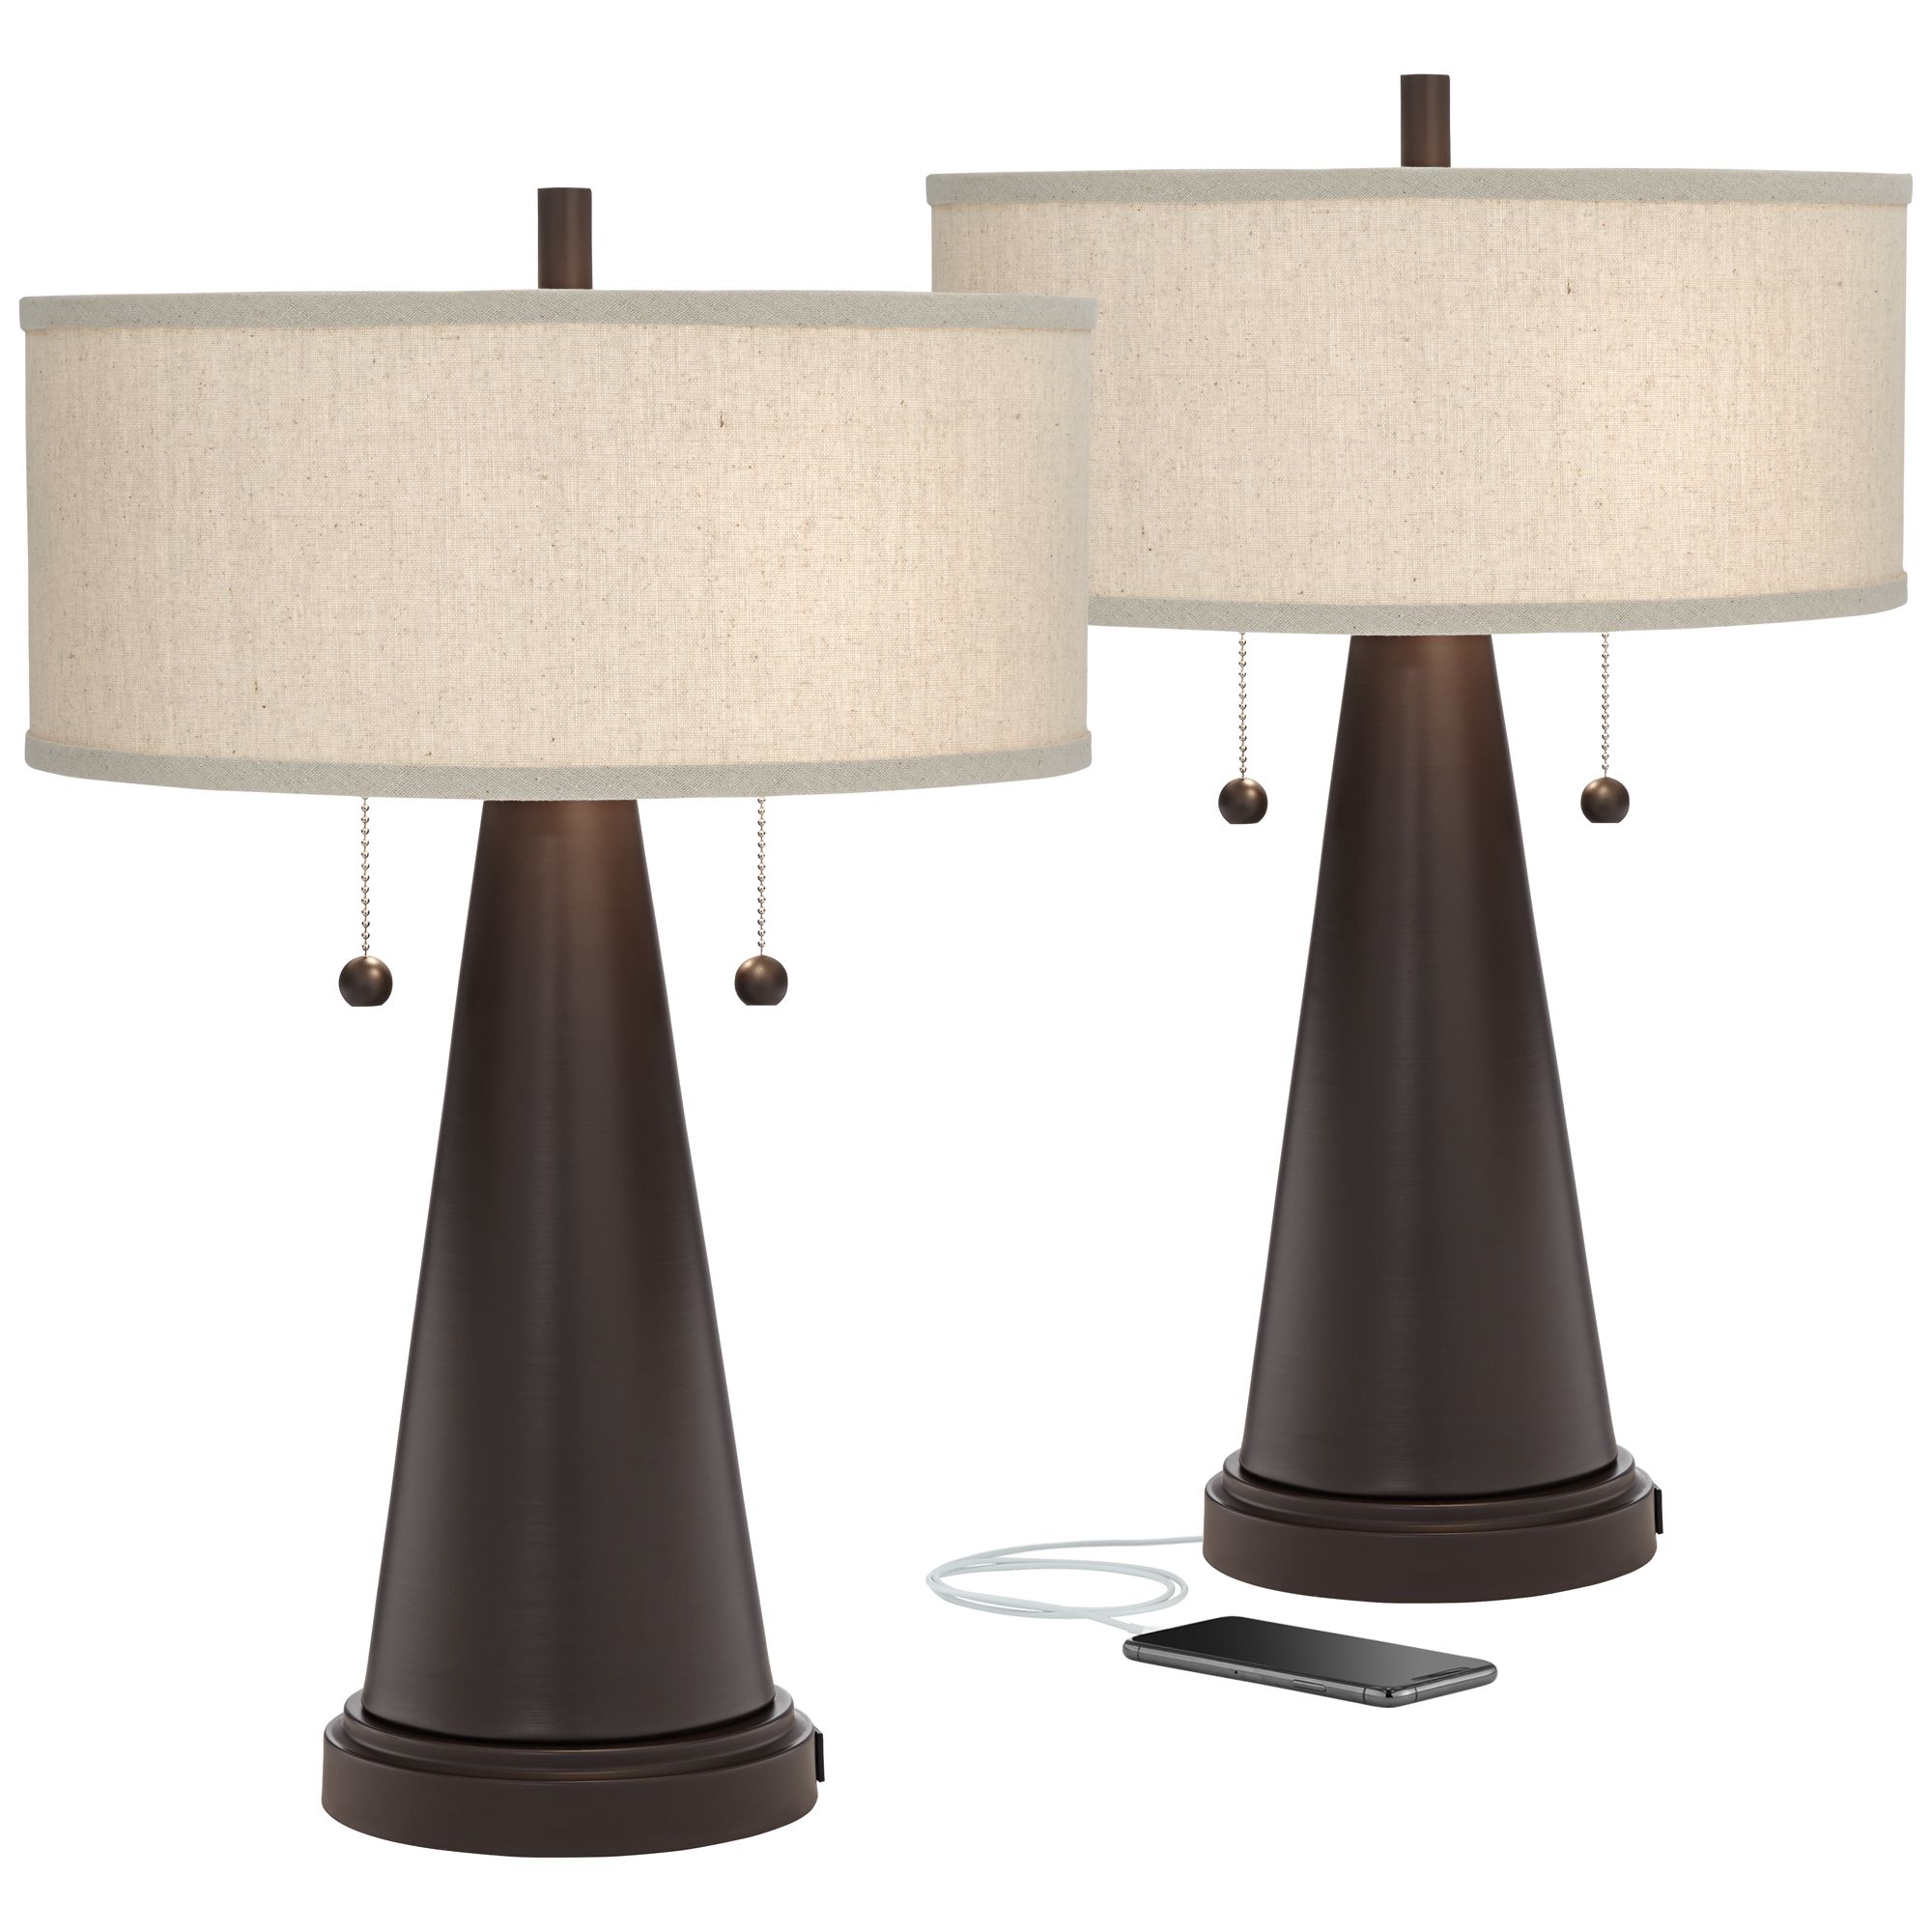 Franklin Iron Works Craig Rustic Farmhouse Accent Table Lamps 23" High Set of 2 Bronze with USB Charging Port Natural Drum Shade for Bedroom Desk - image 2 of 8